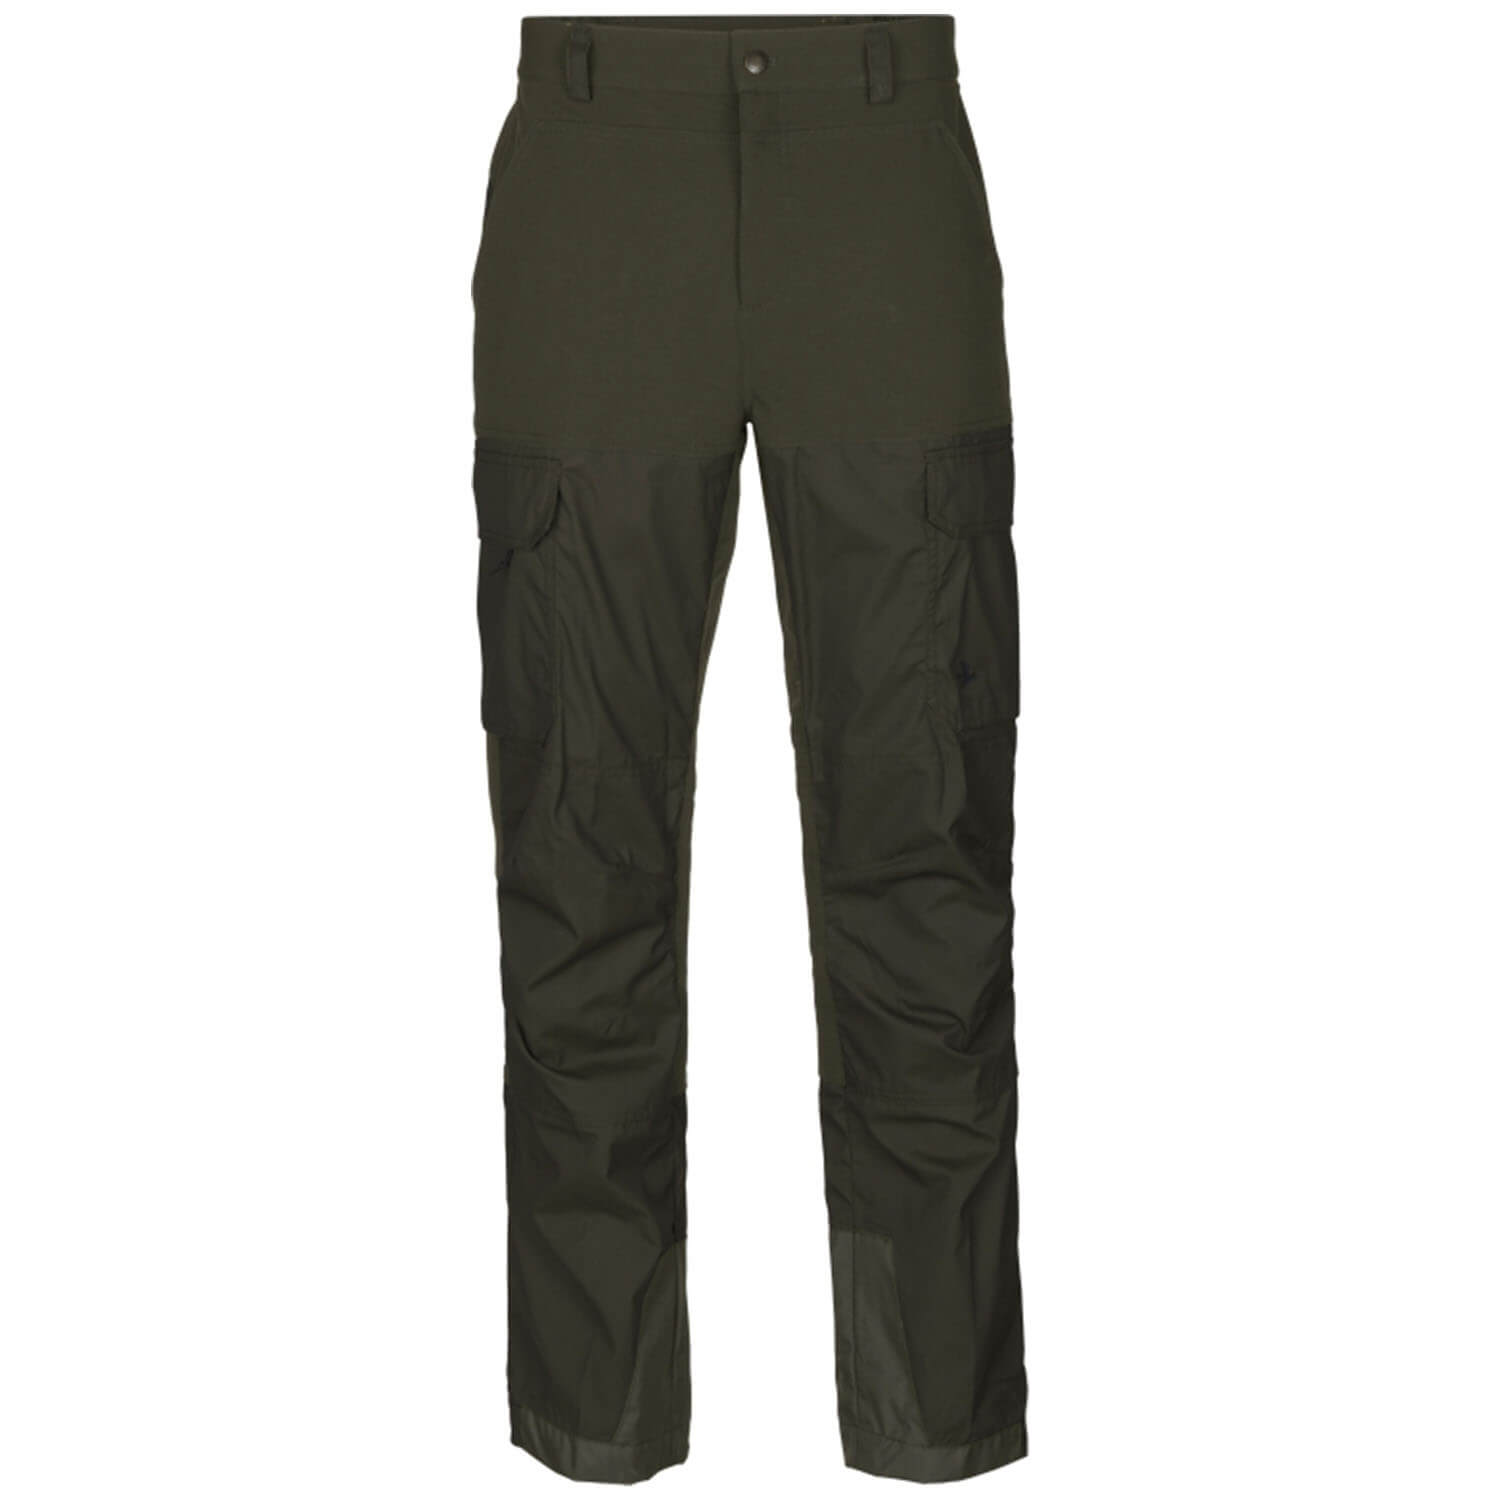 Seeland Trousers Elm (light pine/grizzly brown) - Hunting Trousers